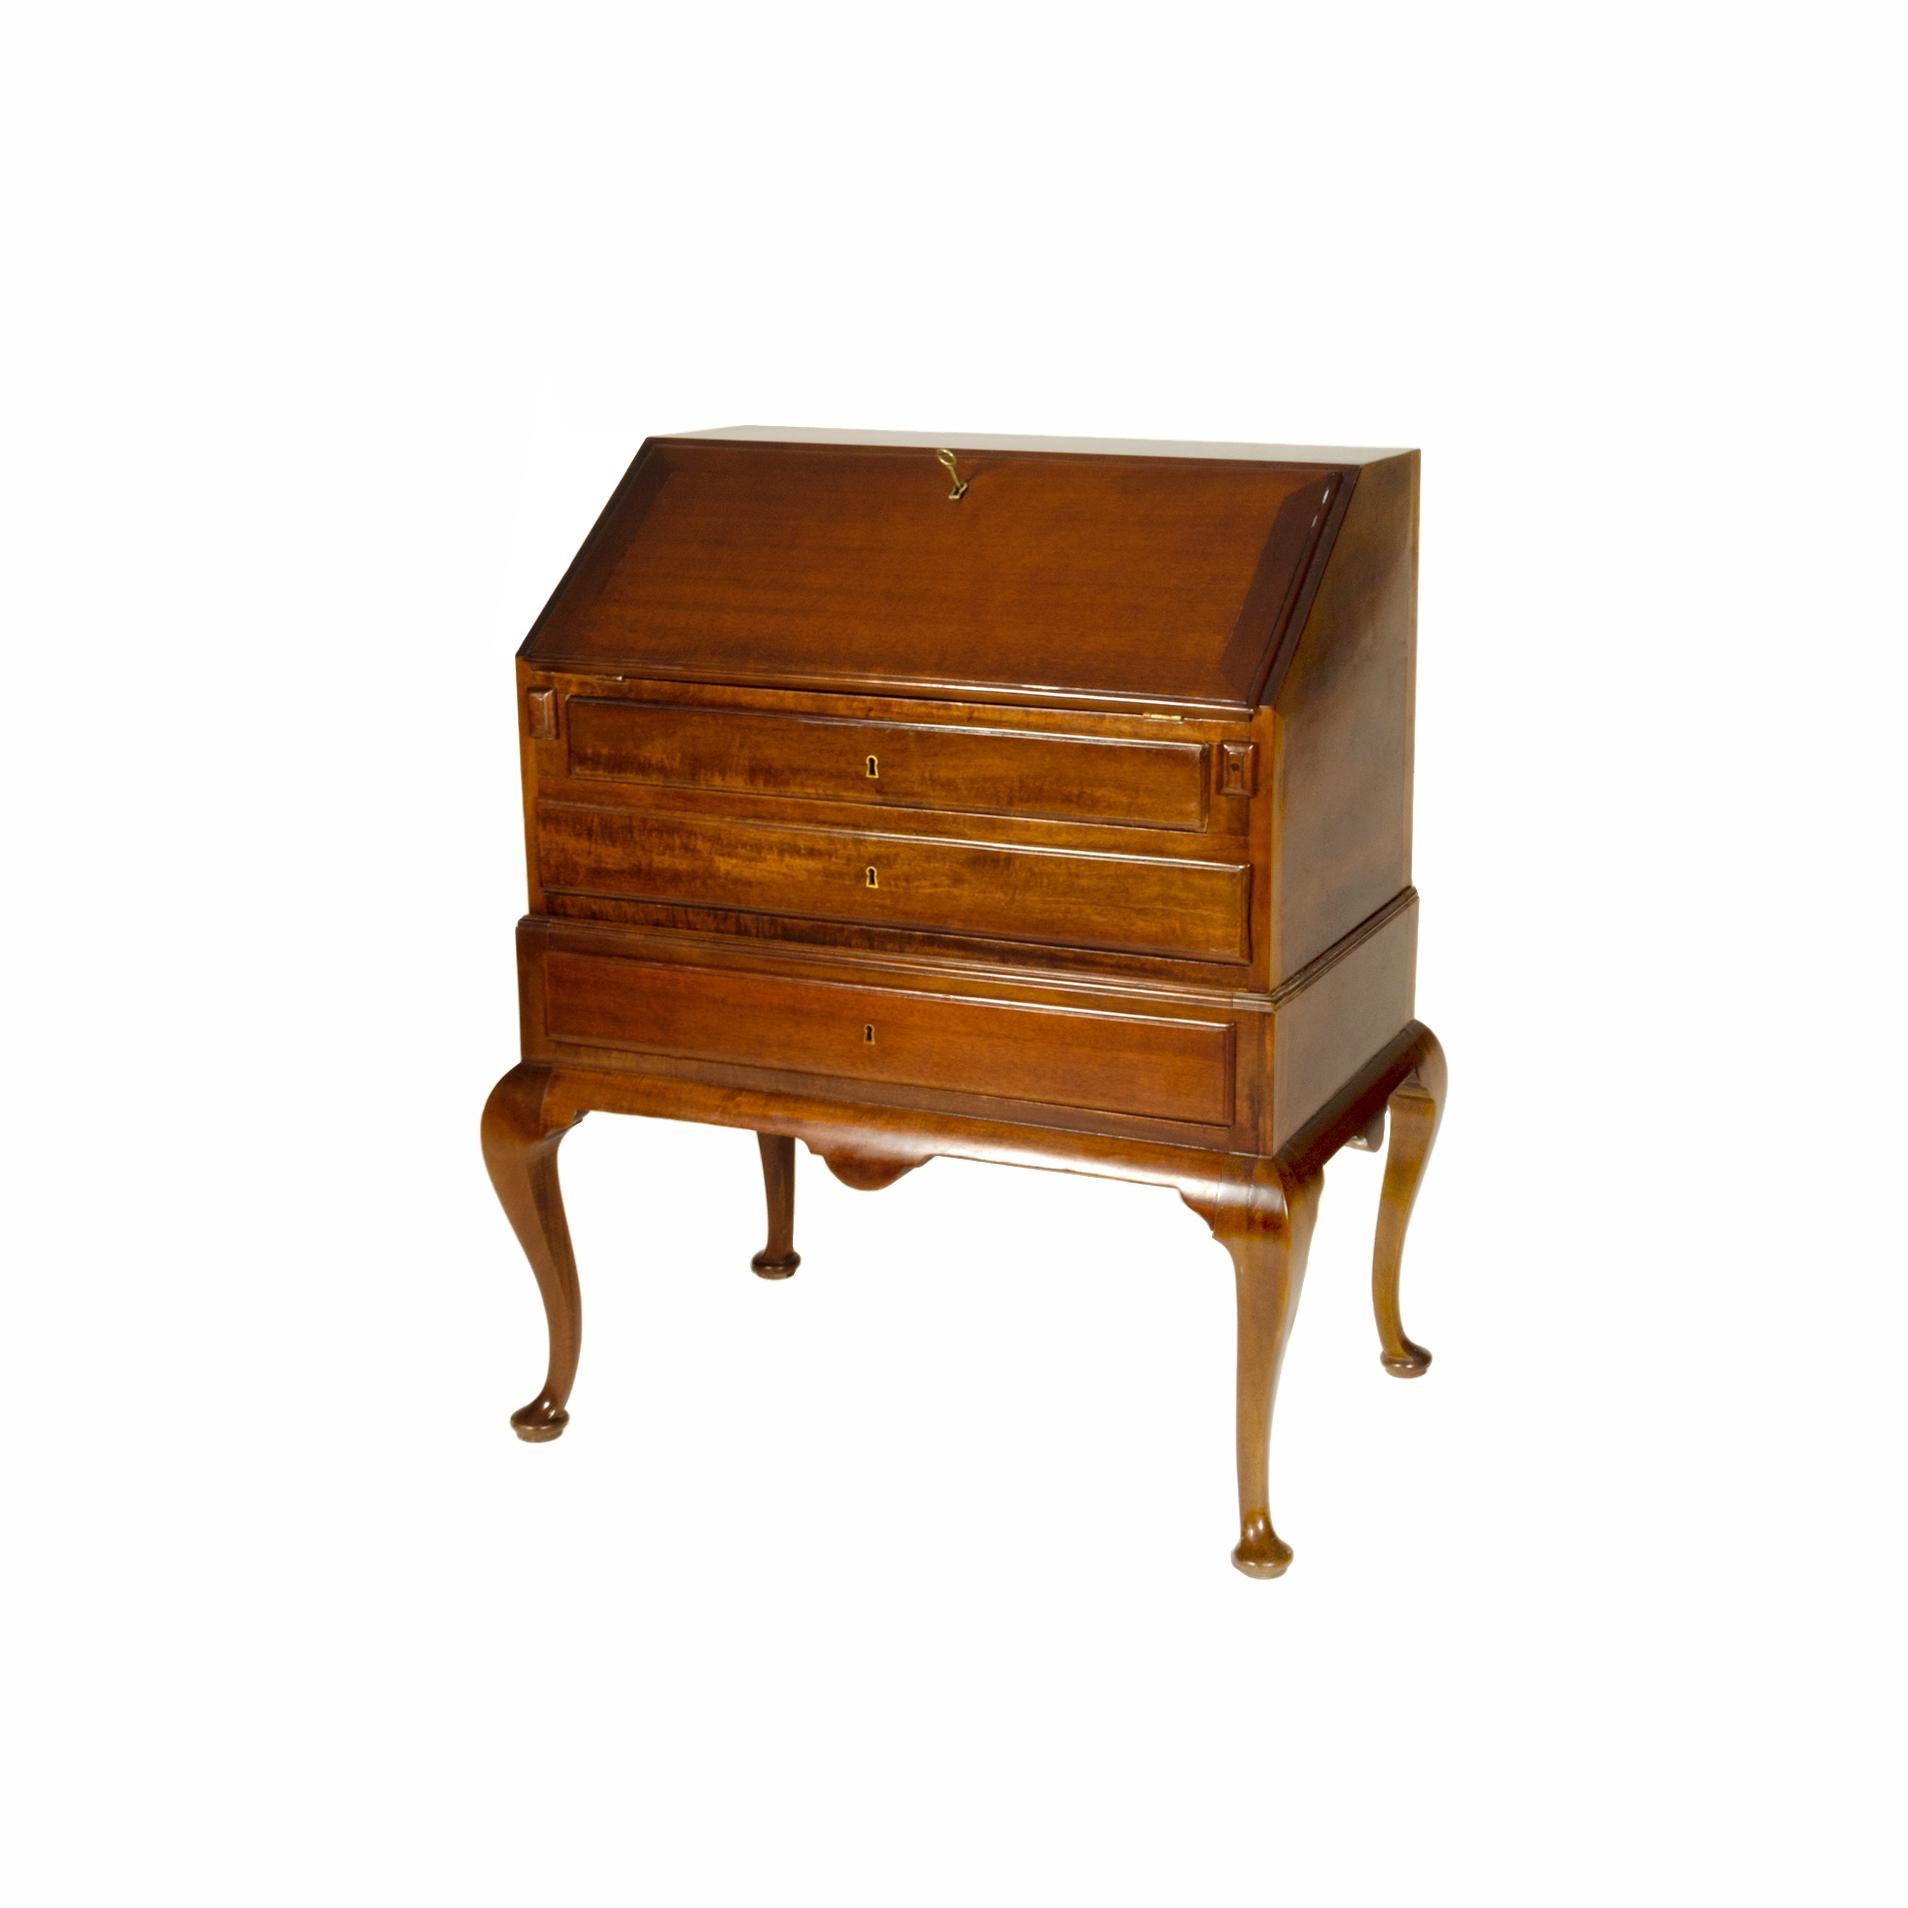  A Writing Desk with working metal hardware, a drop-front writing desk opening to an assortment of drawers and compartments, four dovetailed drawers. 
The interior has multiple pigeon holes and shaped interior drawers, pilaster drawers, fan carving,